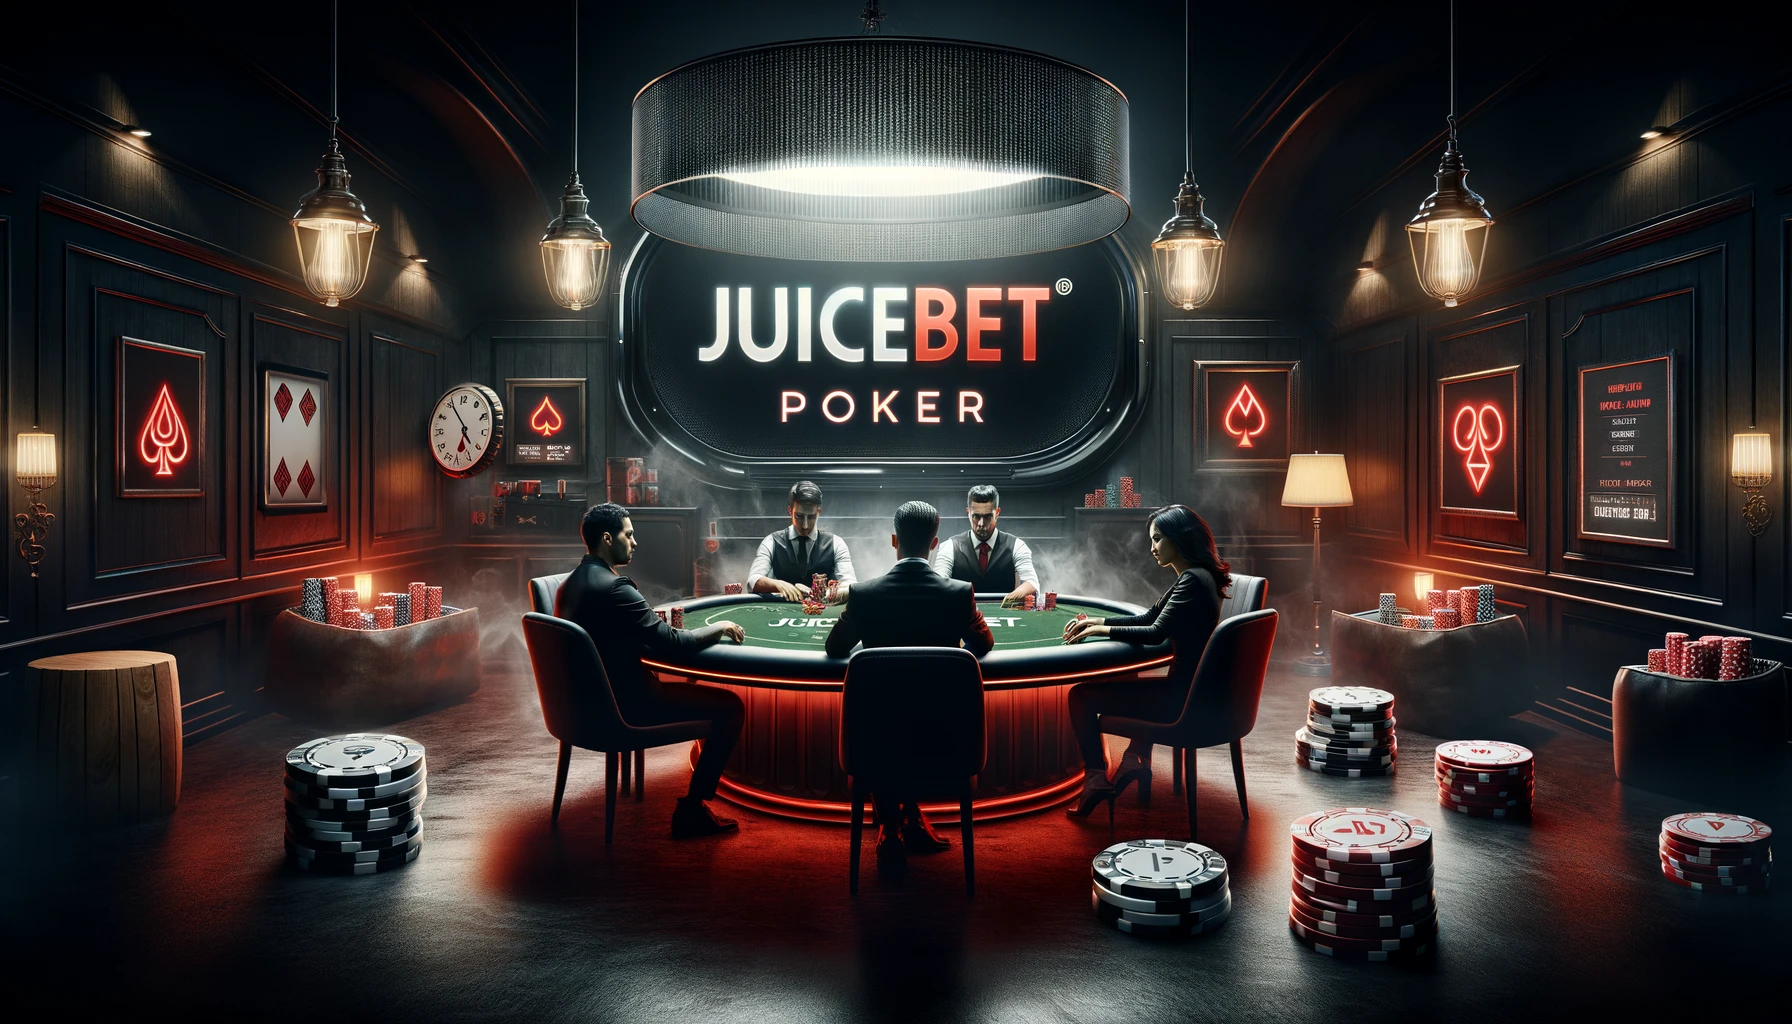 Introduction to the world of poker at Juicebet 1